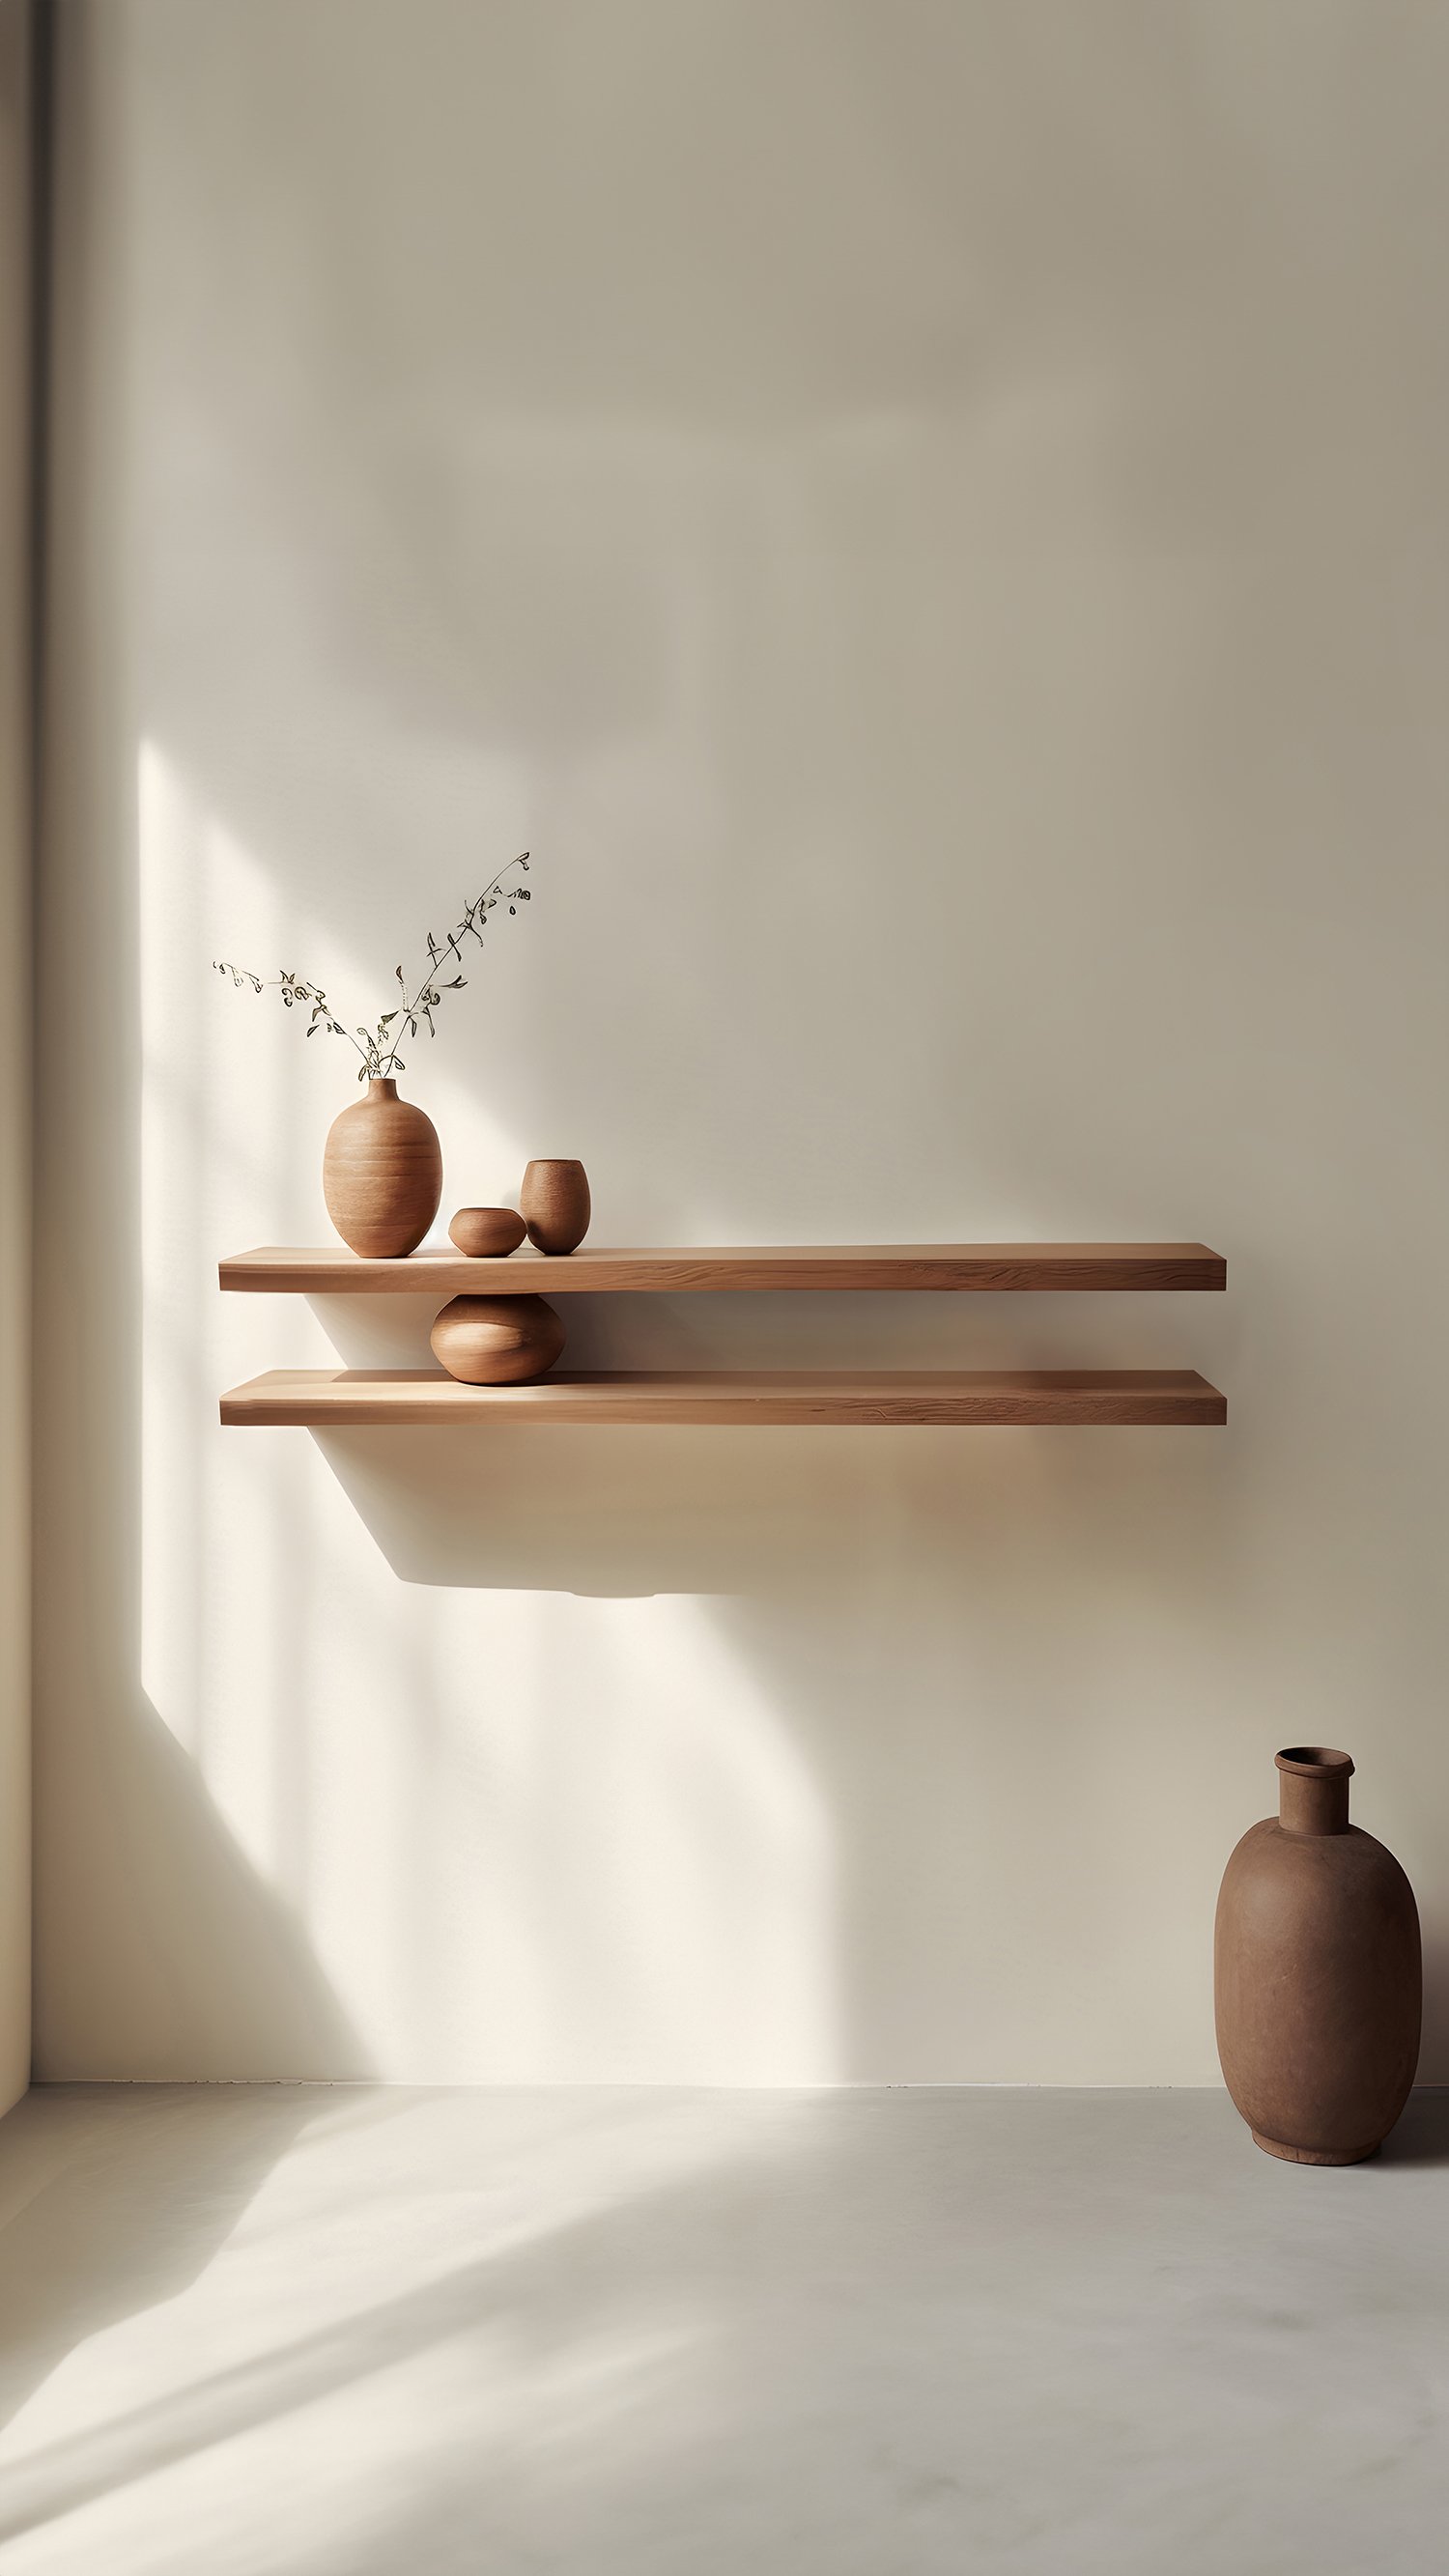 Set of Two Floating Shelves with One Sculptural Wooden Pebble Accent in the Middle, Sereno by Joel Escalona — 11.jpg